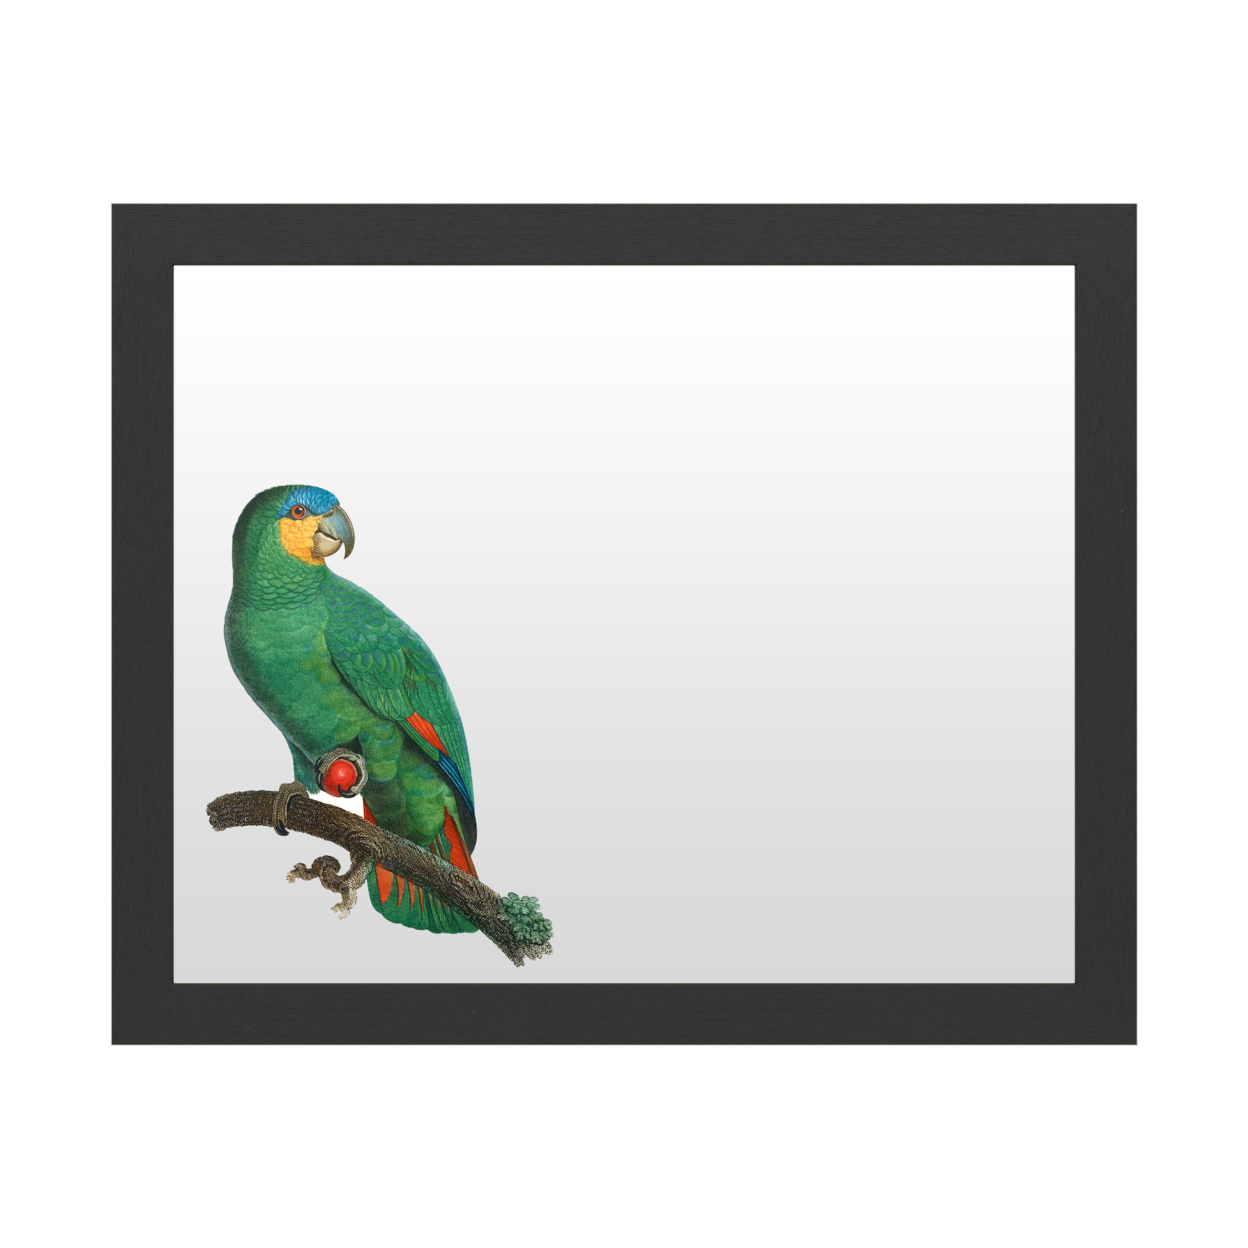 Dry Erase 16 X 20 Marker Board With Printed Artwork - Barraband Parrot Of The Tropics I White Board - Ready To Hang